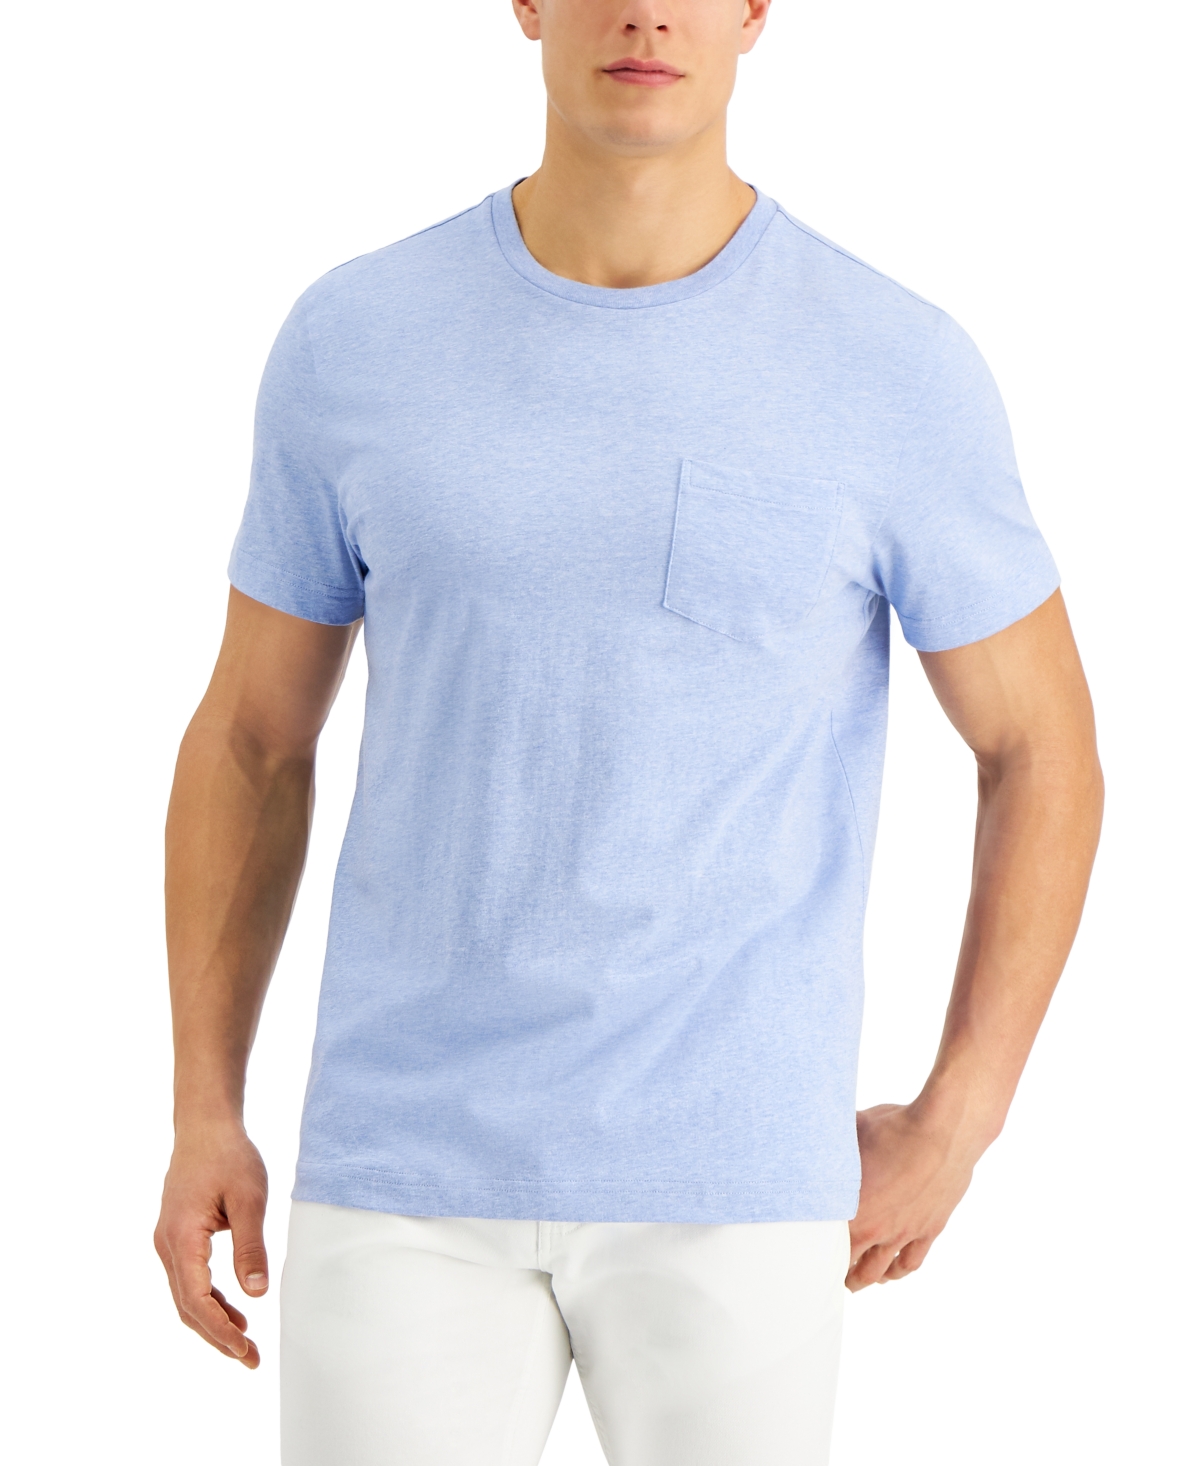 Club Room Men's Solid Pocket T-Shirt, Created for Macy's